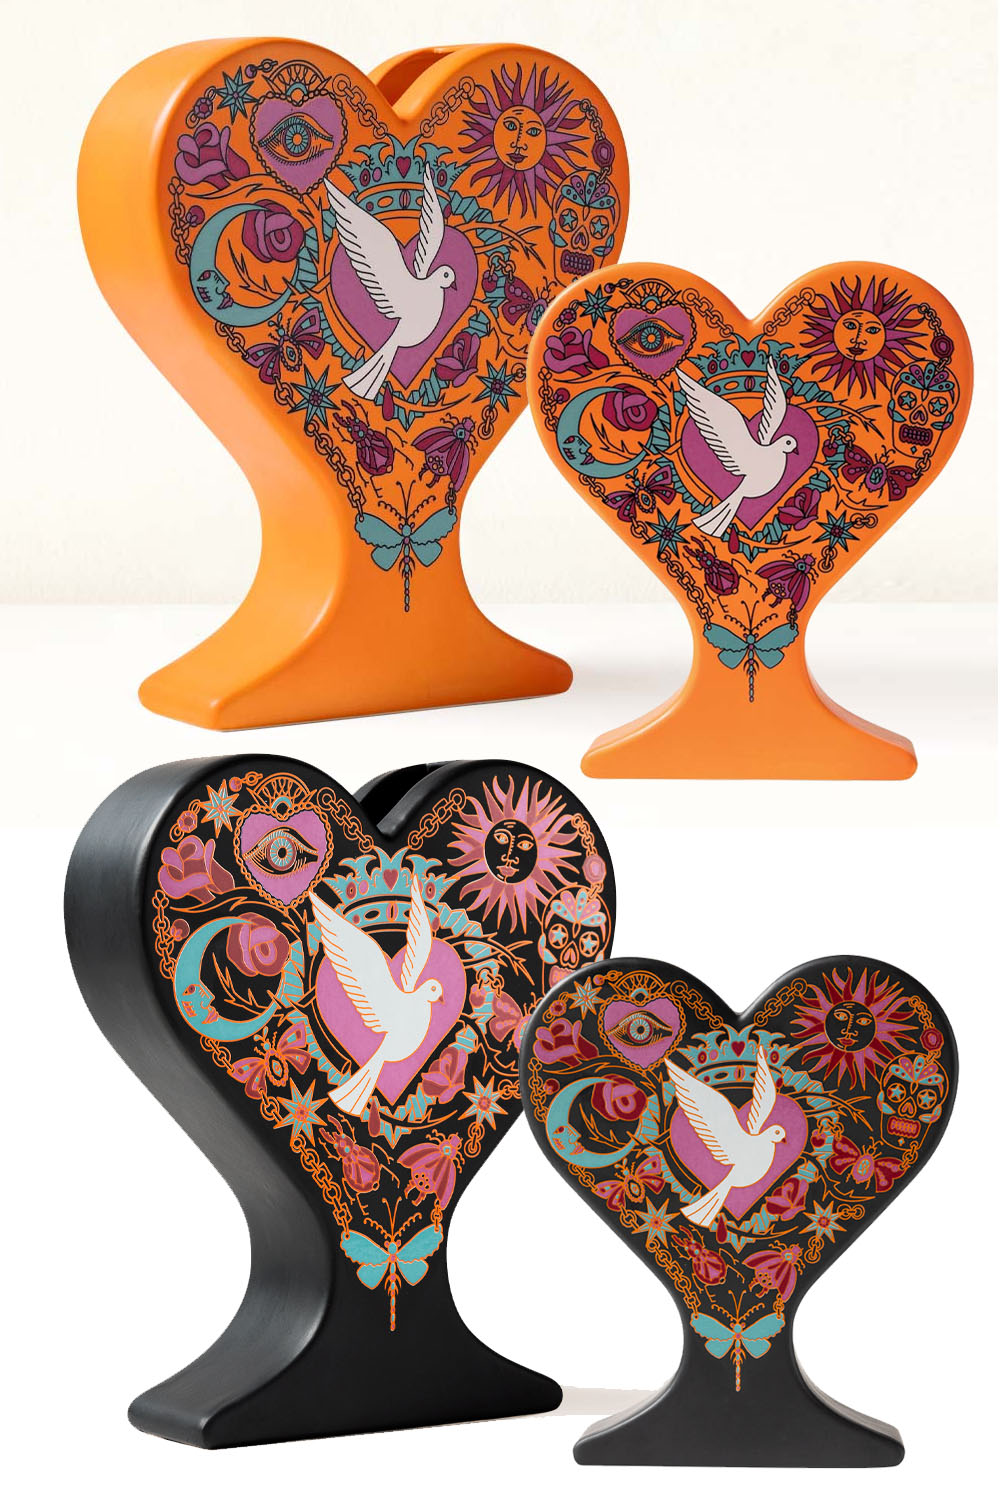 Artist Decorated Heart Vases by lolita cortes